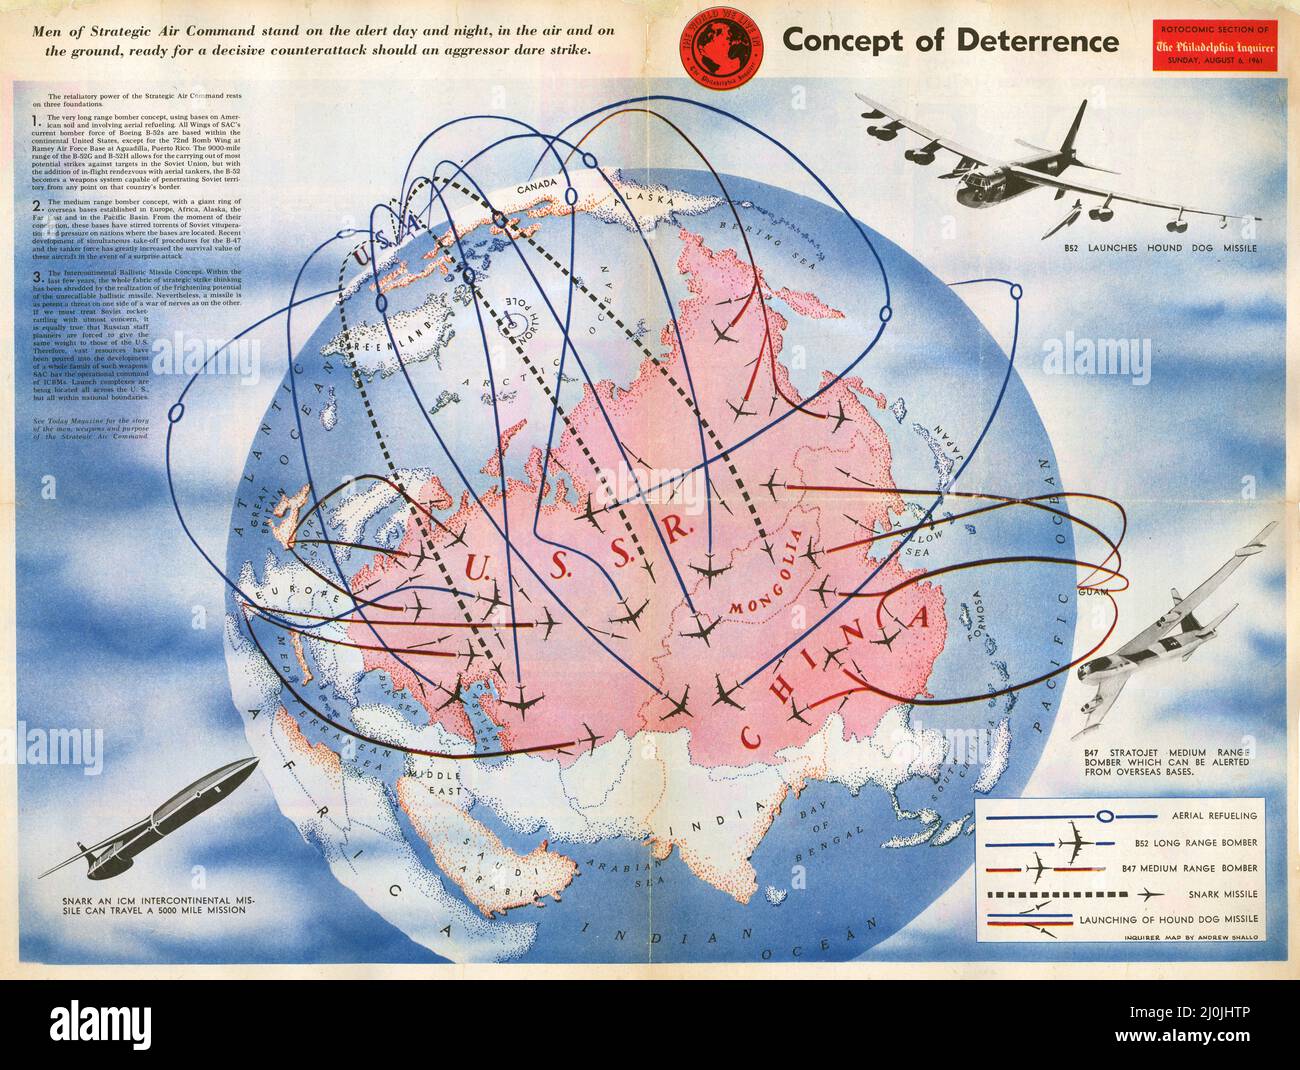 1961 anti-Soviet Union propaganda map - Concept of Deterrence - Men of Strategic Air Command on alert day and night. Stock Photo